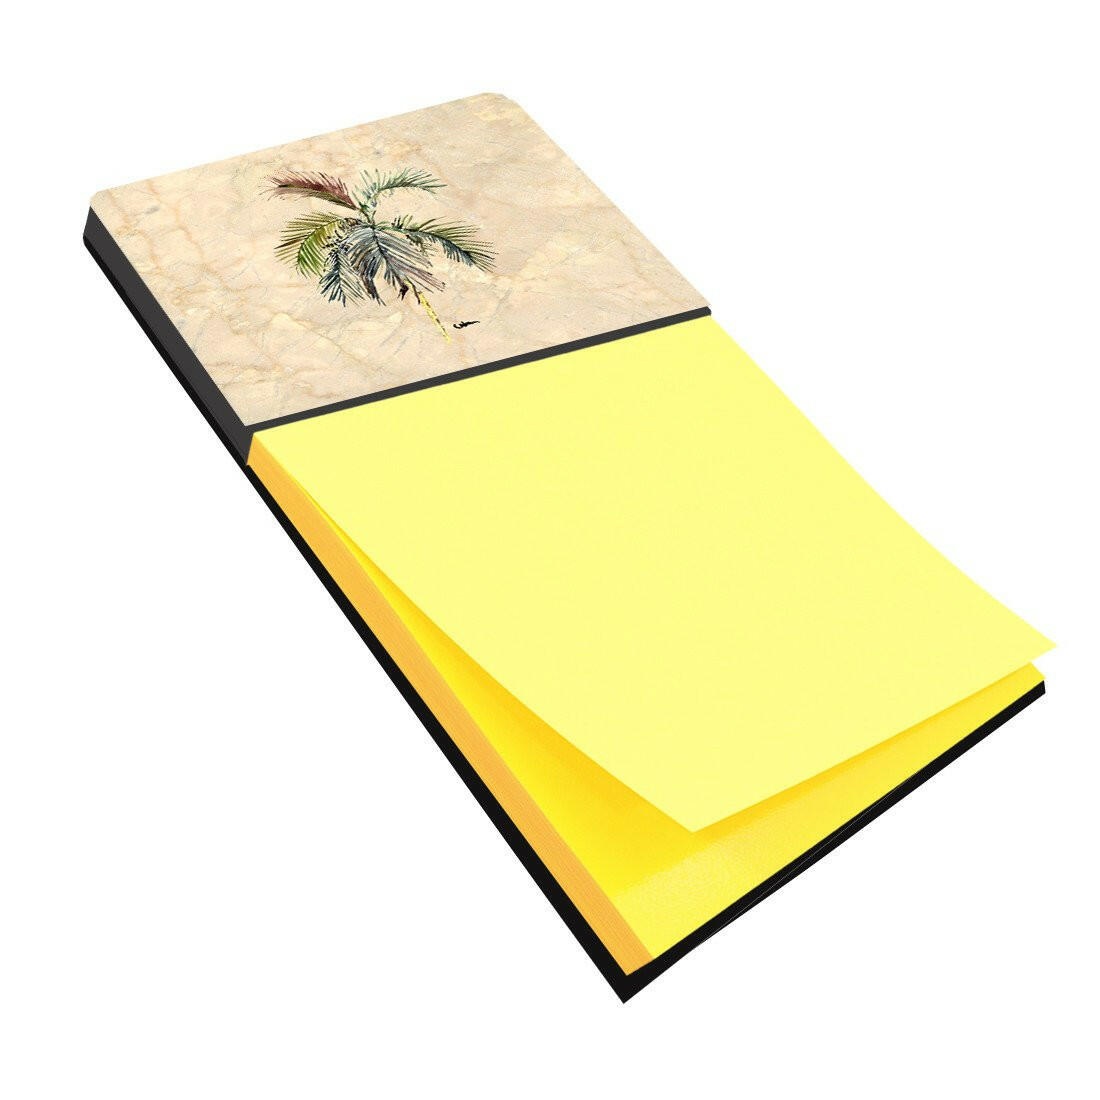 Palm Tree Refiillable Sticky Note Holder or Postit Note Dispenser 8483SN by Caroline's Treasures